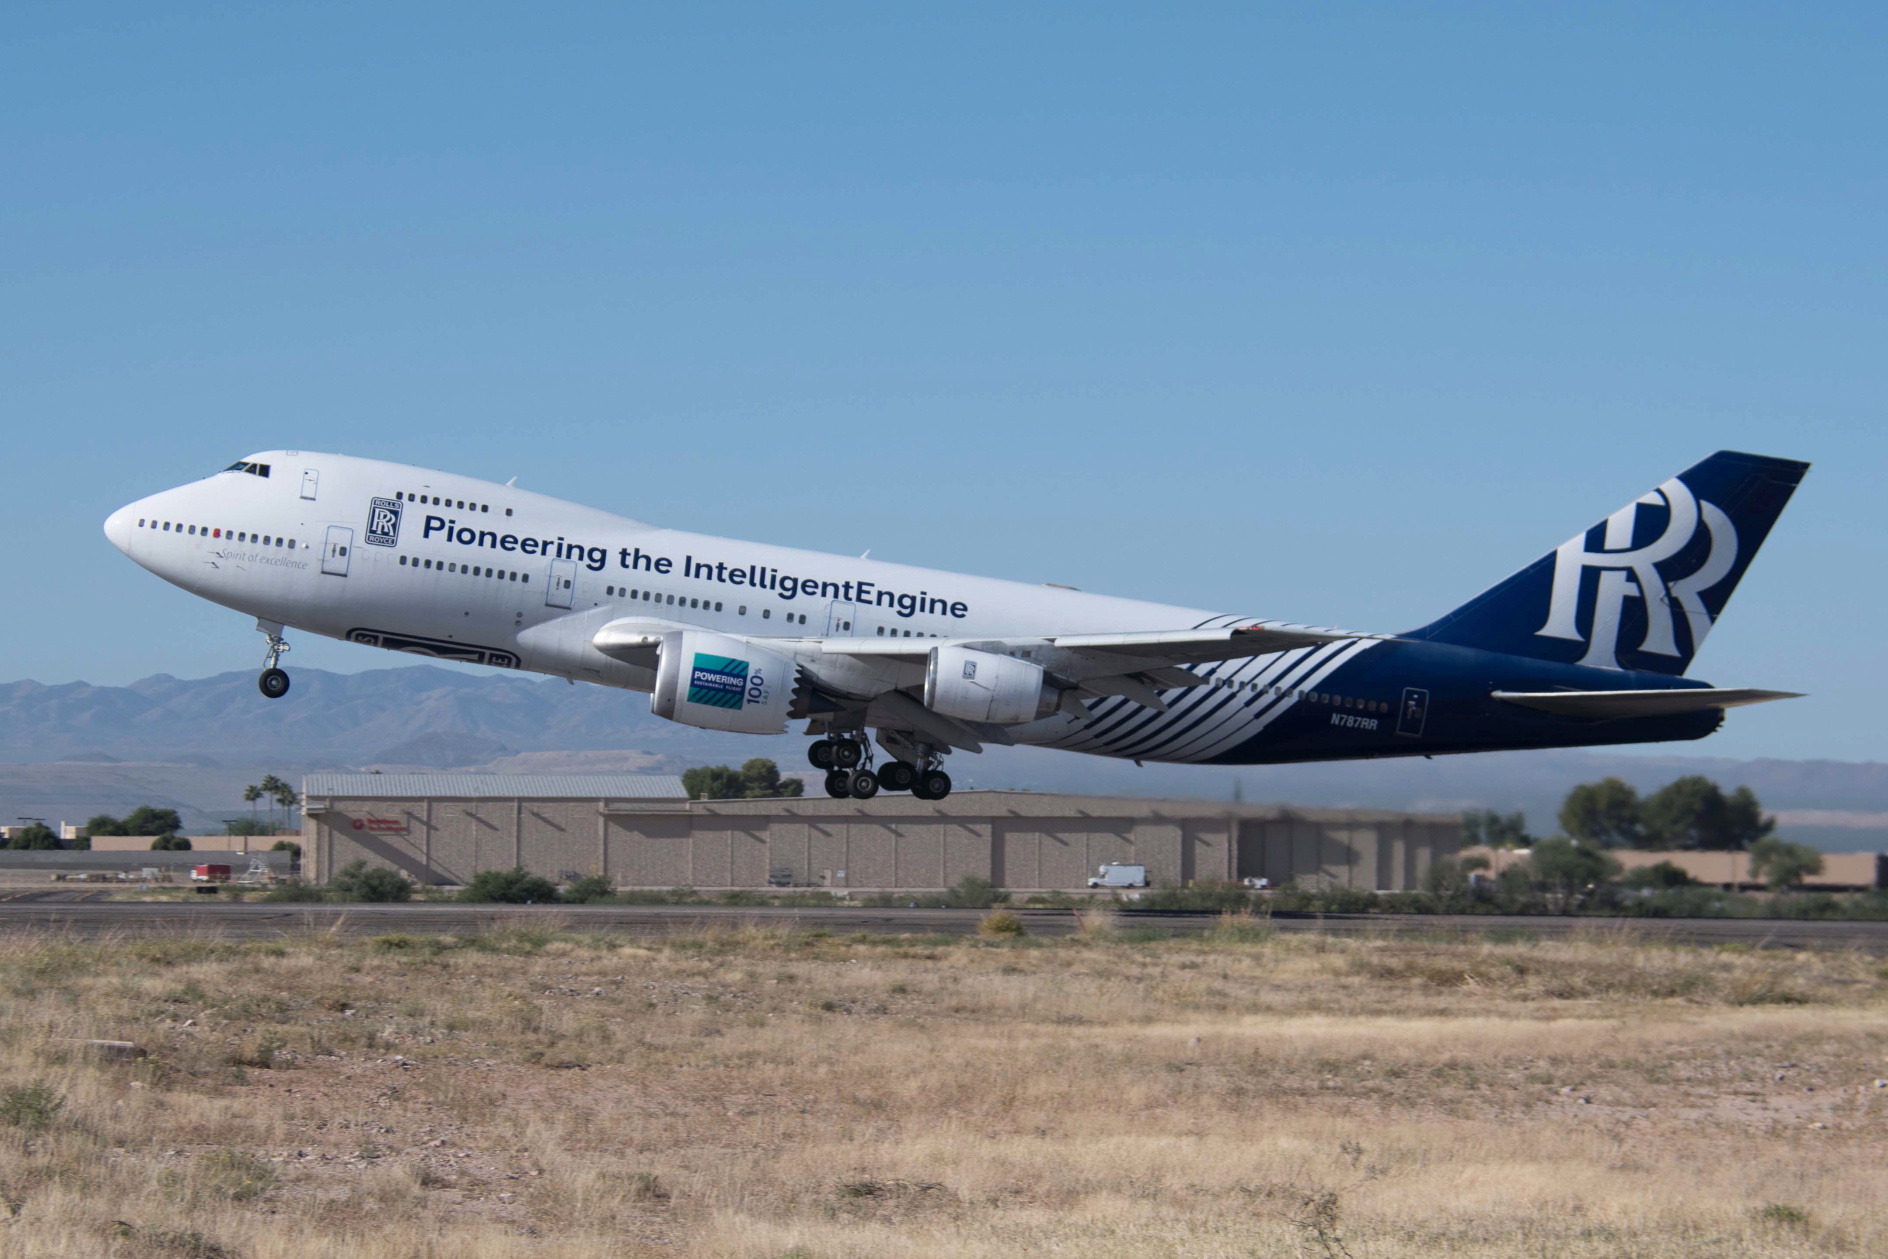 Rolls-Royce, working with Boeing and World Energy, has carried out a successful test flight of its 747 Flying Testbed aircraft using 100% Sustainable Aviation Fuel (SAF) on a Trent 1000 engine. Click to enlarge.